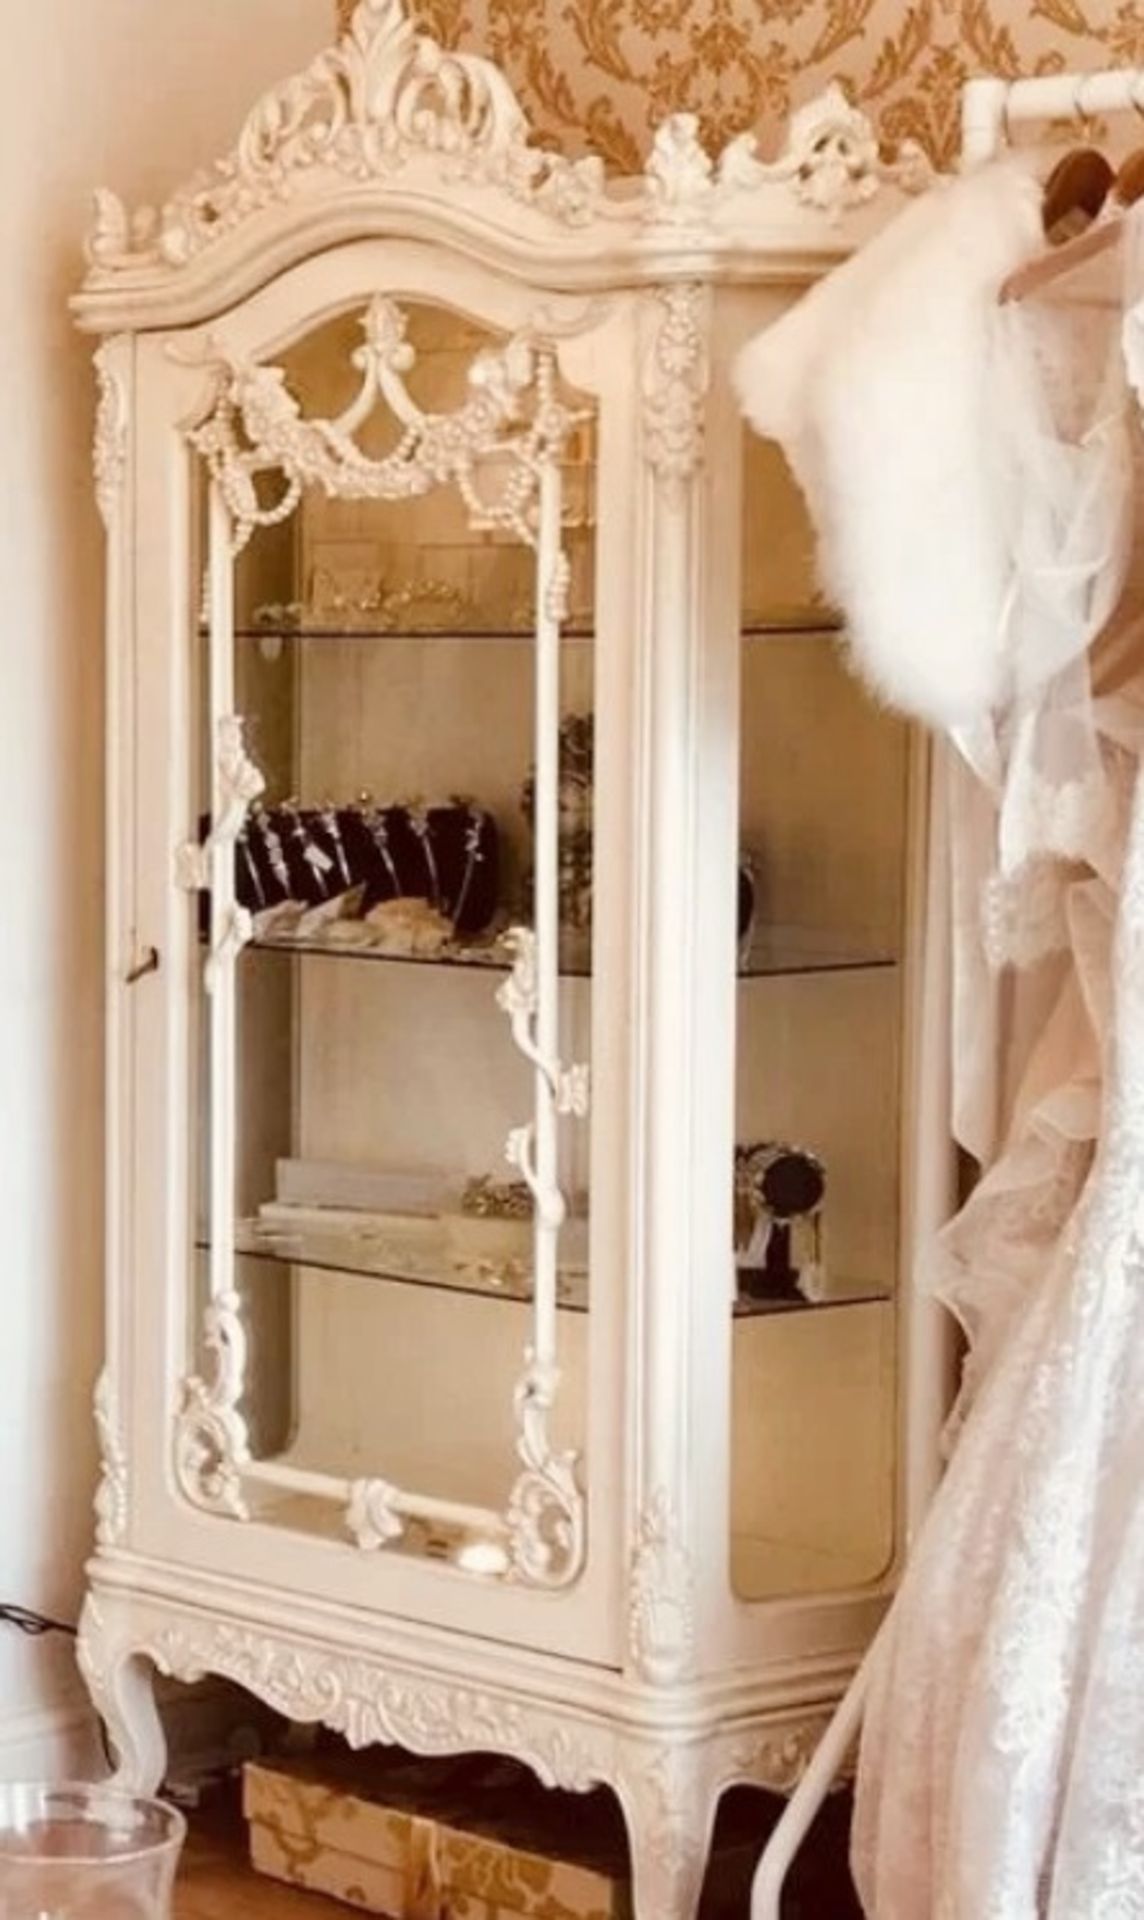 1 x Ornate Illuminated Wardrobe With 3 Glass Shelves - Recently Removed From A Bridal Boutique - Image 6 of 20